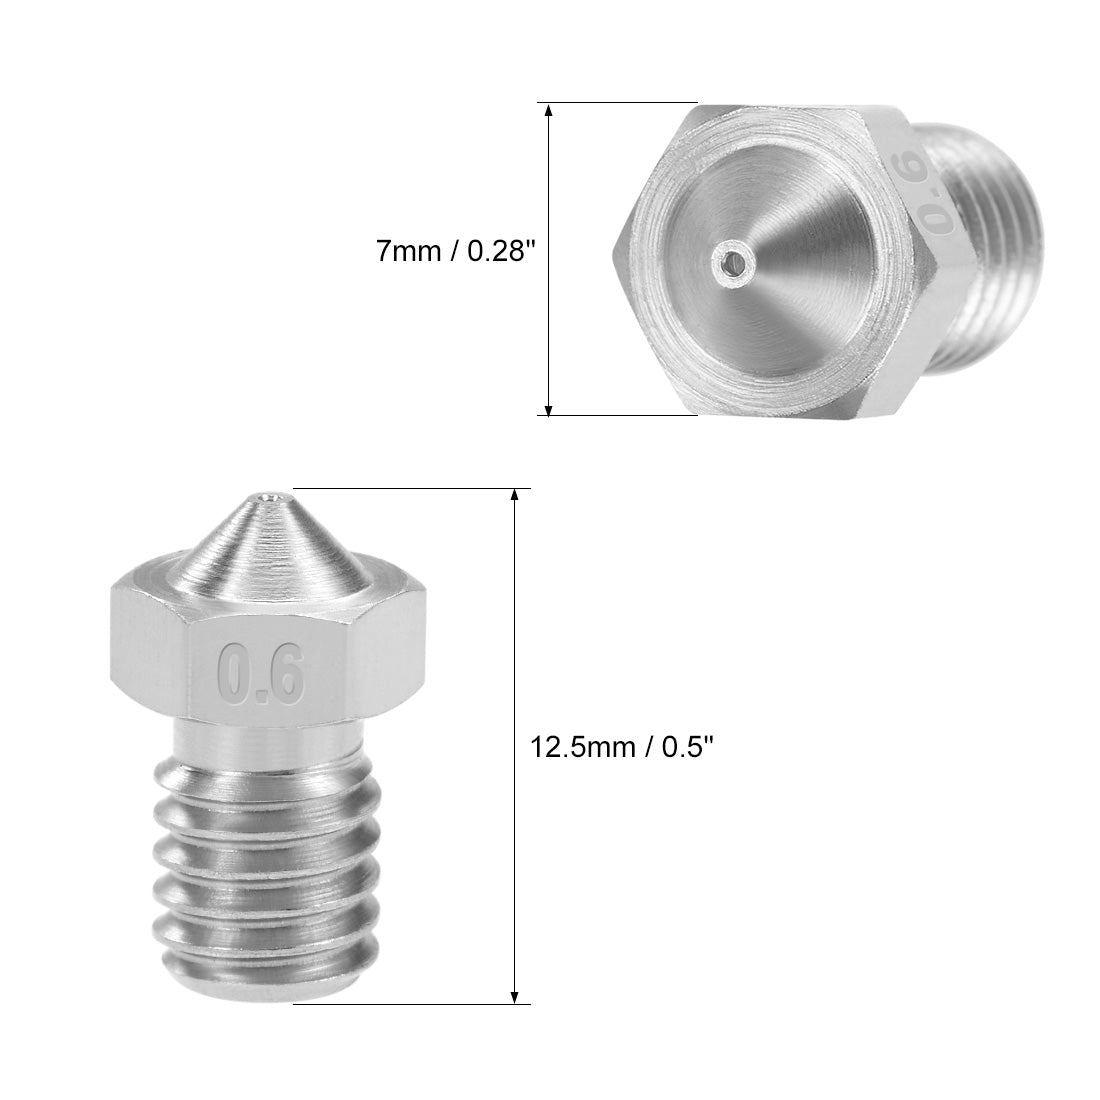 uxcell Uxcell 0.6mm 3D Printer Nozzle Head M6 Thread Replacement for V5 V6 1.75mm Extruder Print, Stainless Steel 4pcs